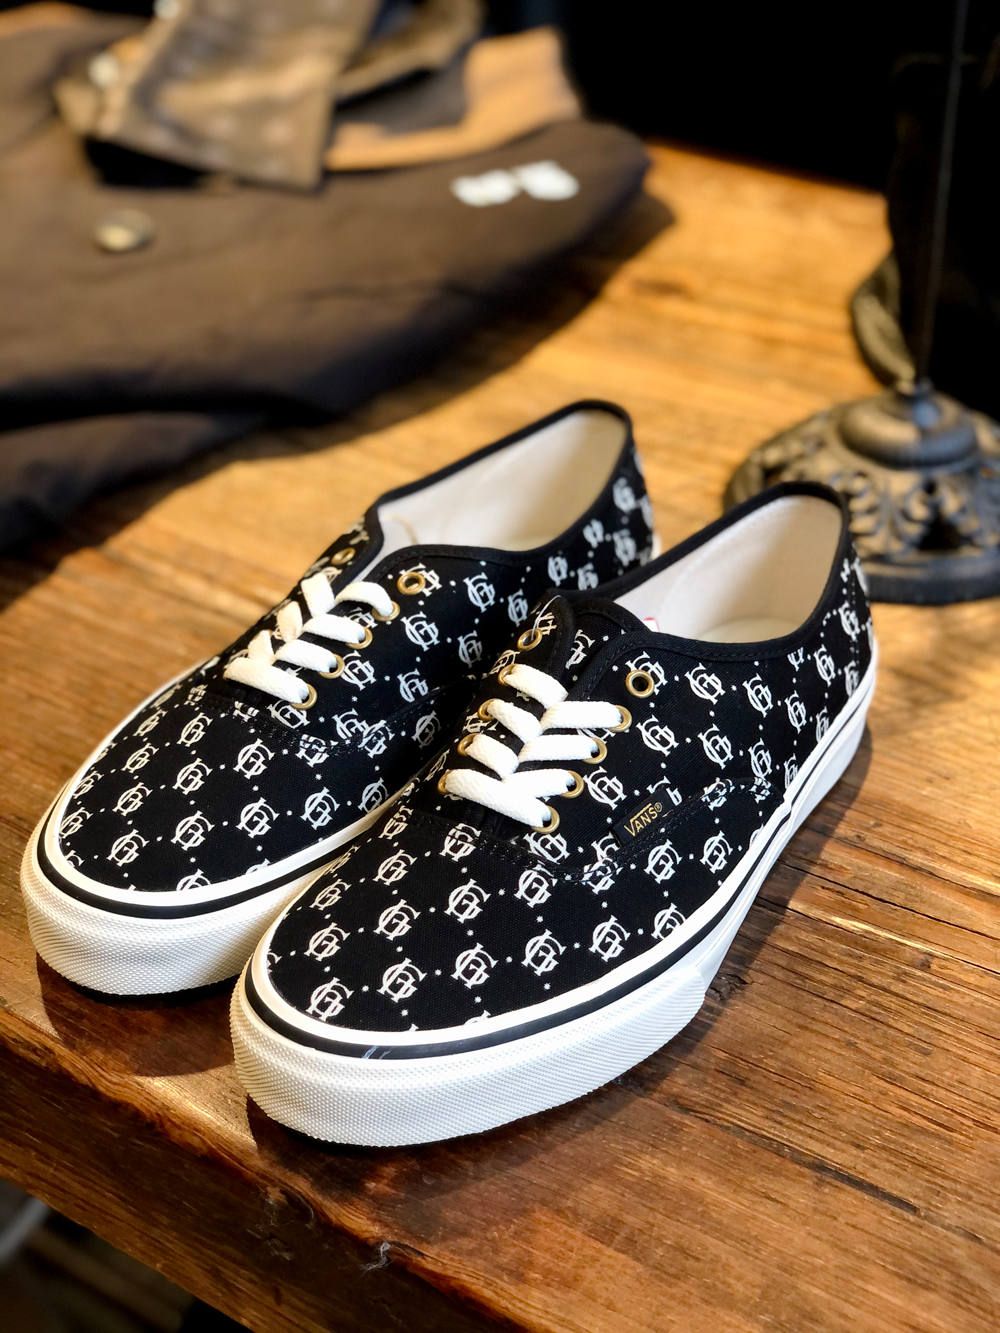 GLAD HAND & Co. - GLAD HAND×VANS PRICE DELIVERY AUTHENTIC 